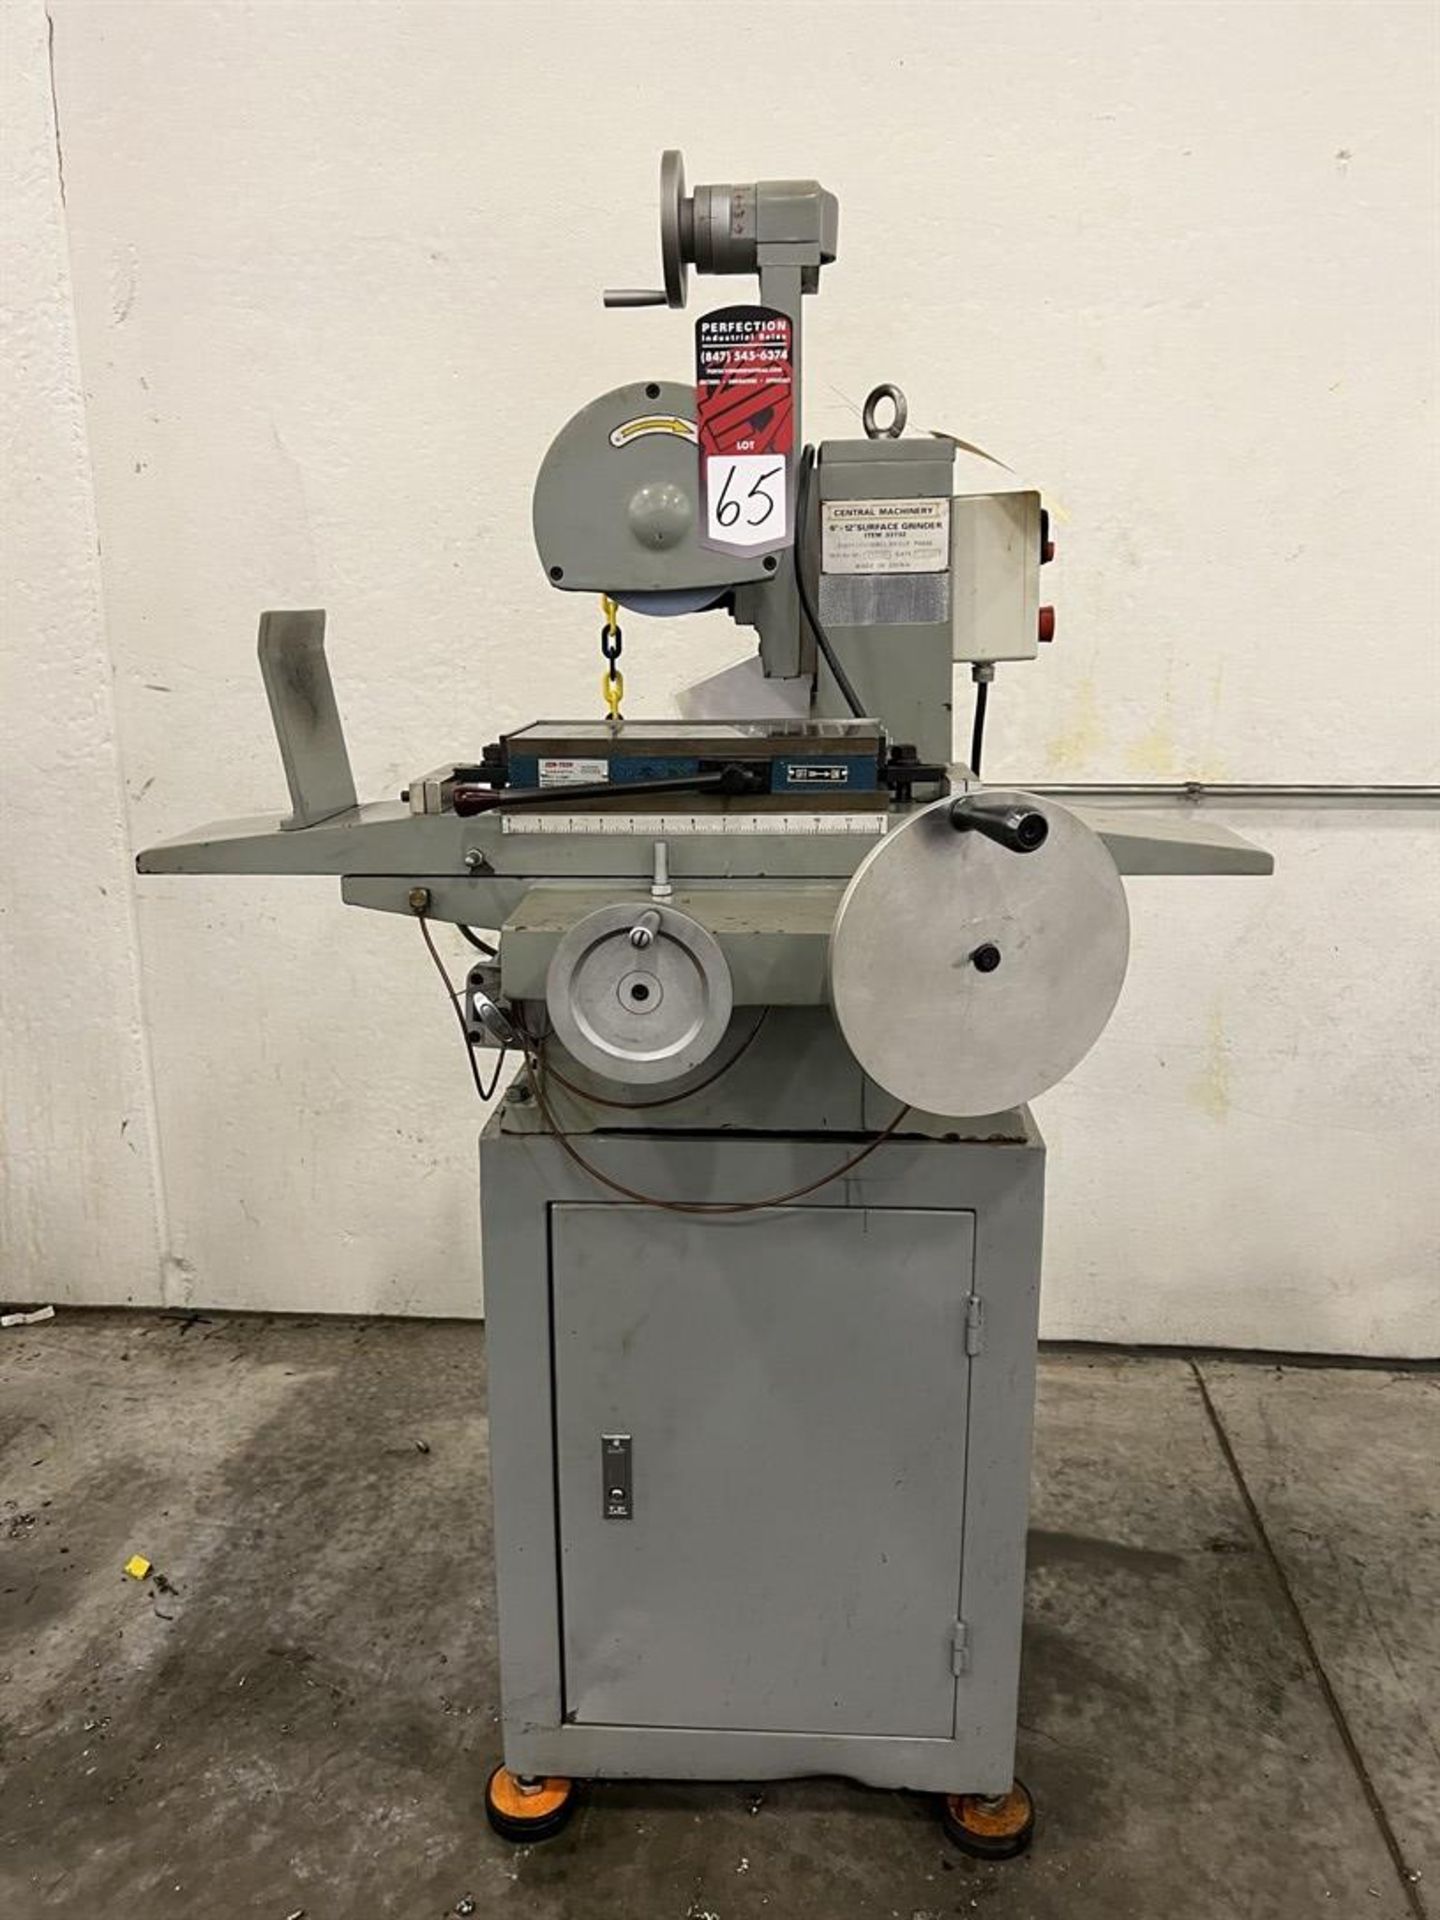 CENTRAL MACHINERY 33732 6” x 12” Surface Grinder, s/n 08615, w/ Cen-Tech Magnetic Chuck - Image 2 of 5